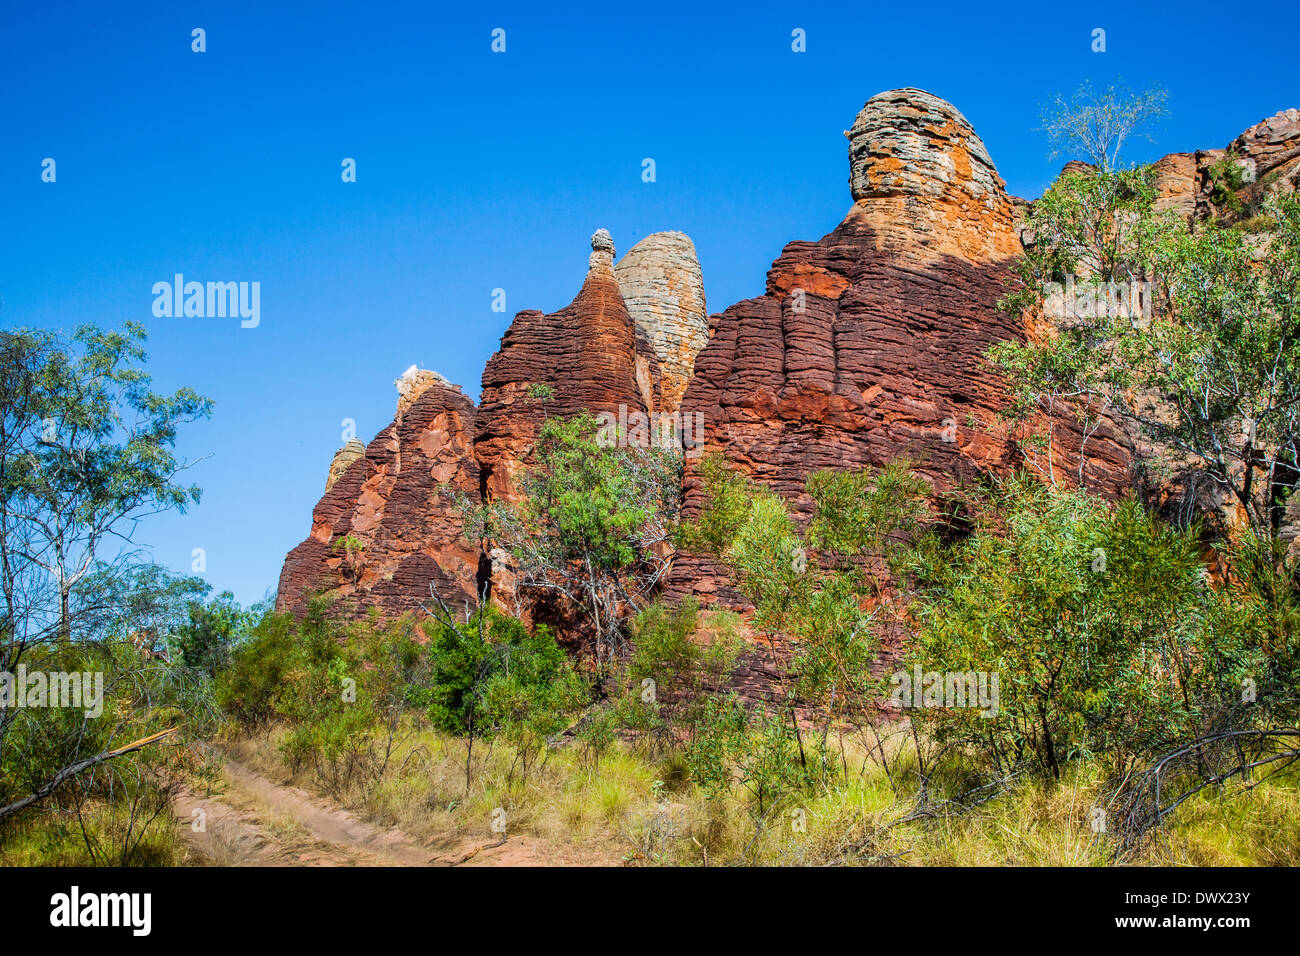 Australia, Northern Territory, Limmen National Park, the towers, pillars and pinnacles of the Western Lost City. Stock Photo